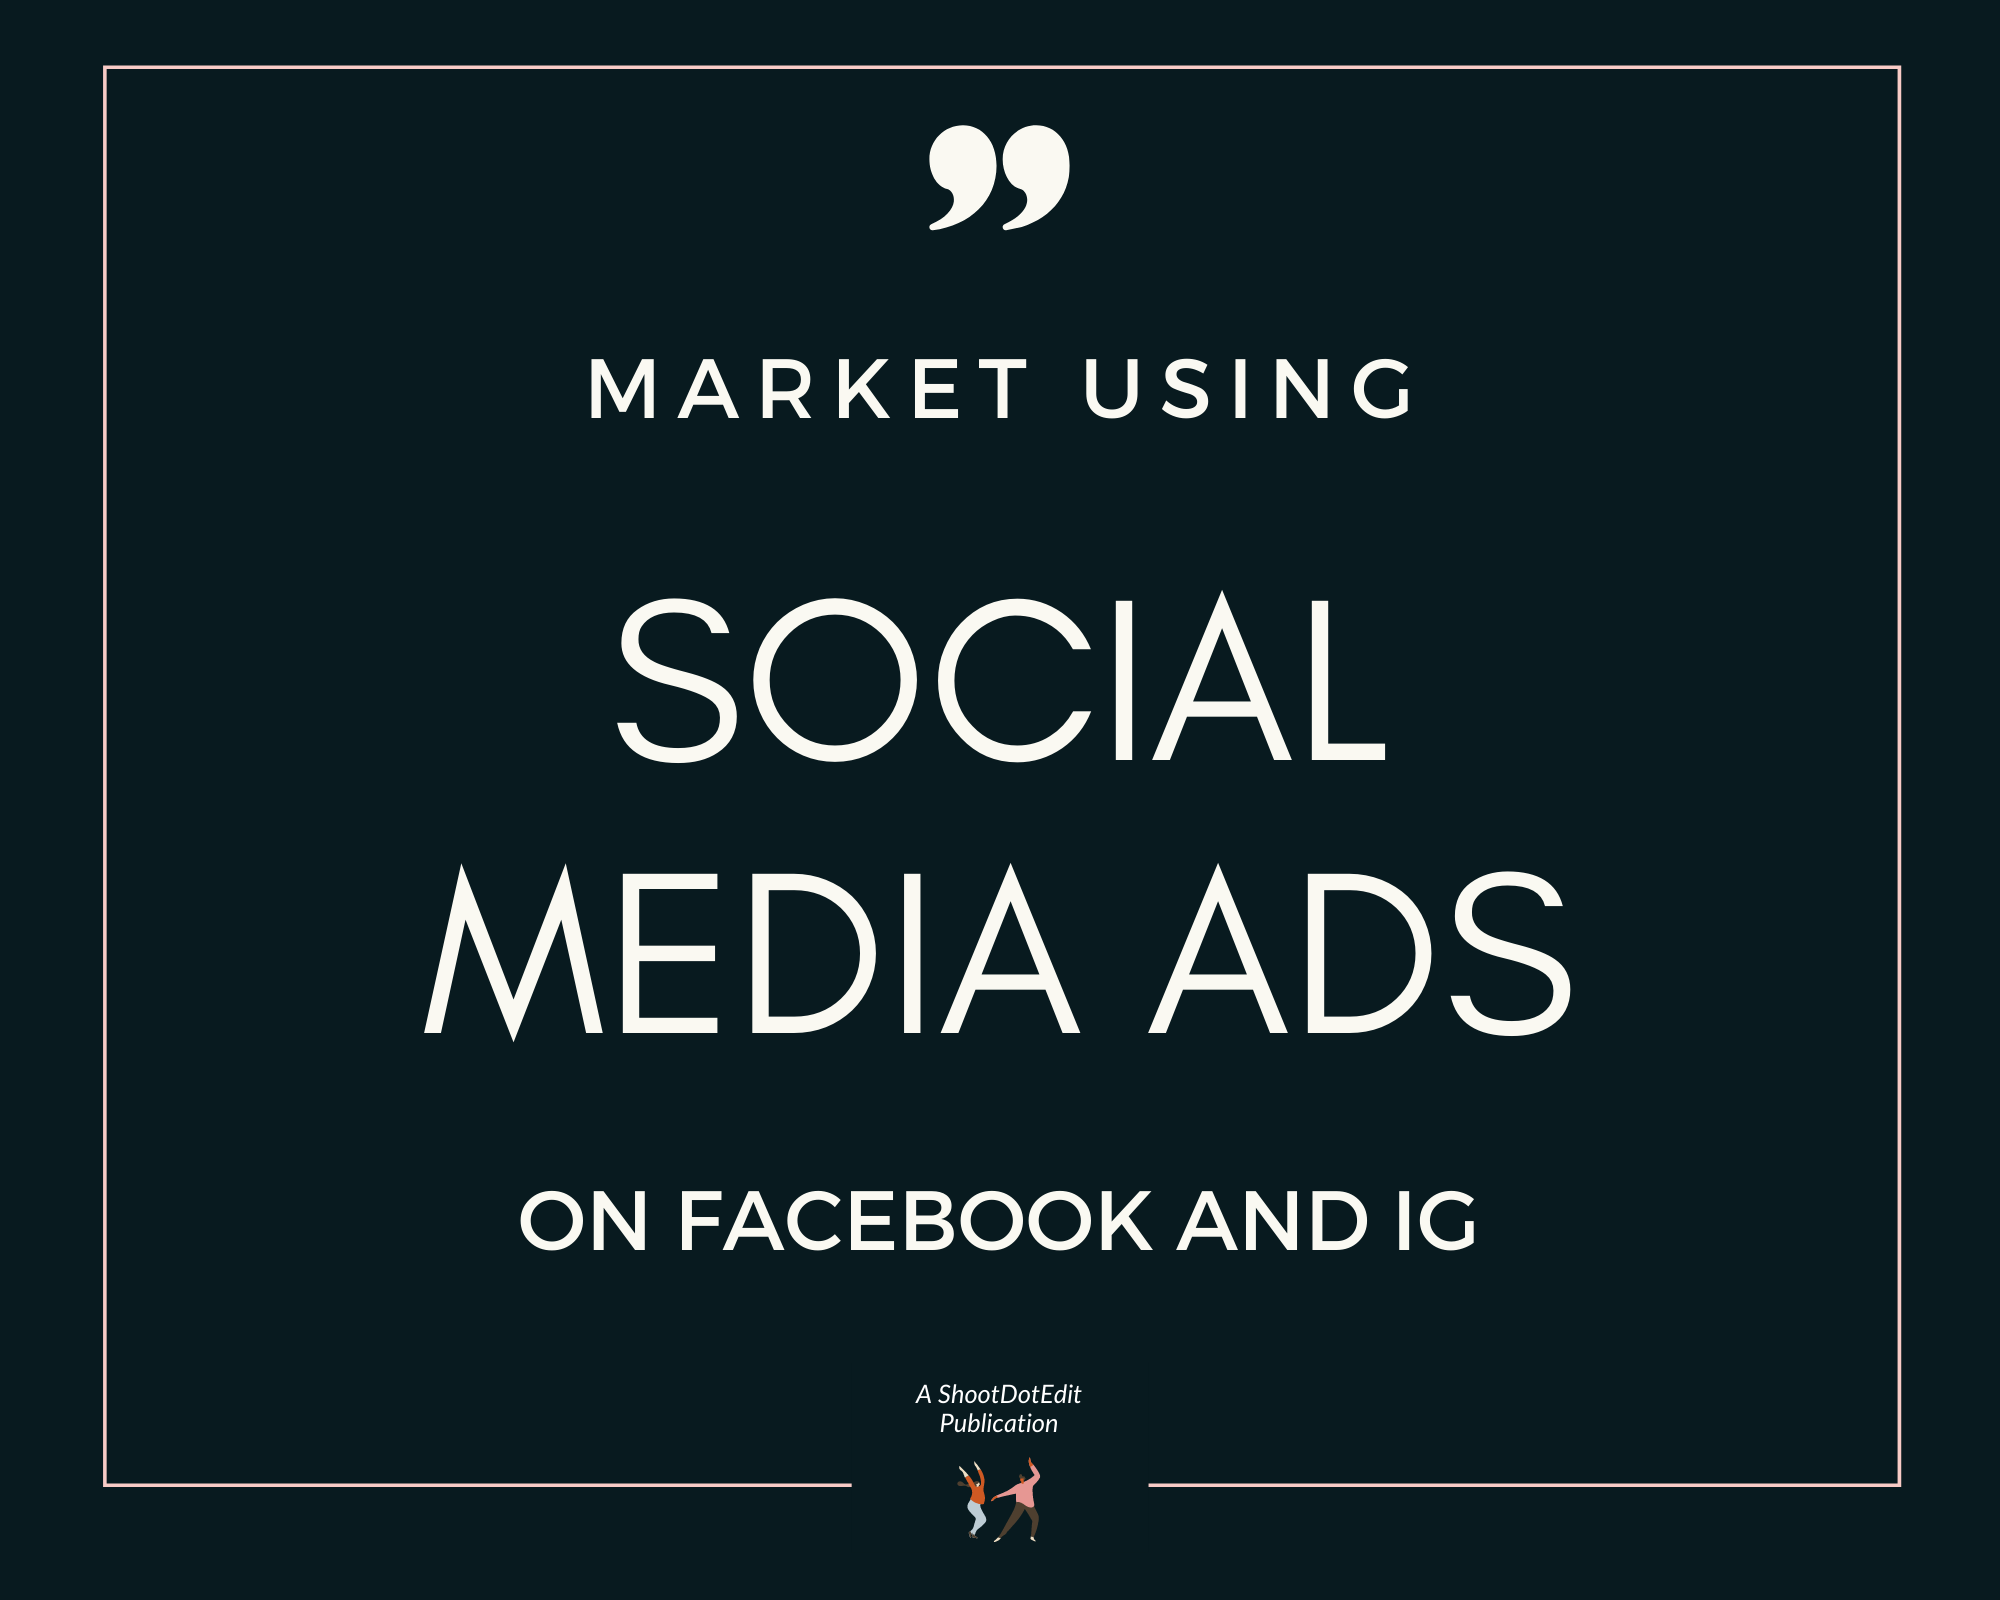 Infographics stating market using social media ads on Facebook and IG